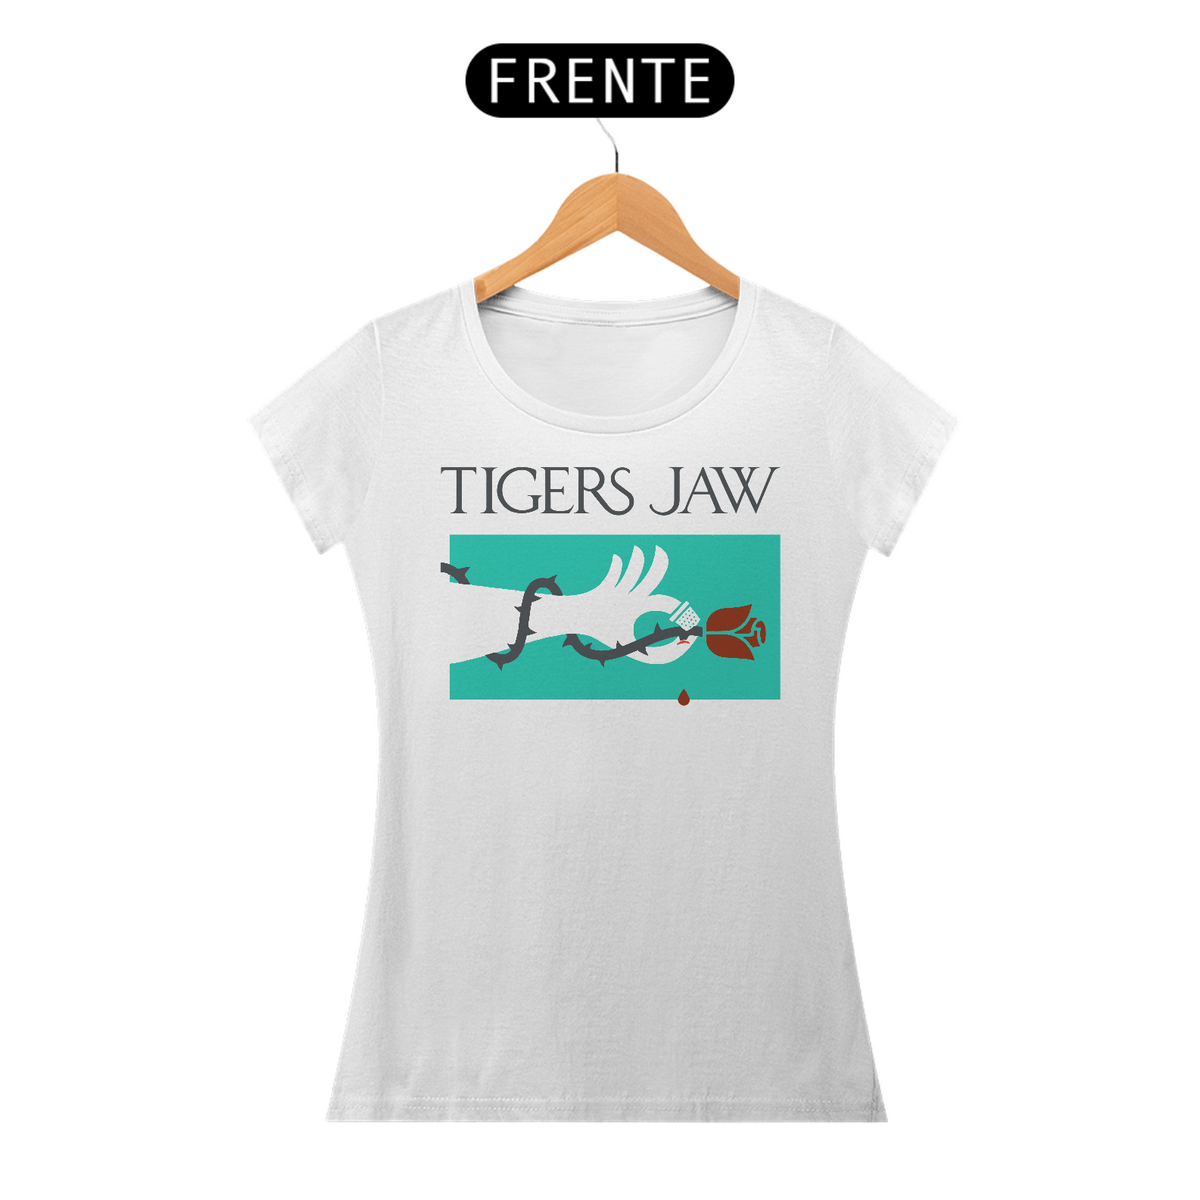 Nome do produto: Tigers Jaw - Baby Look